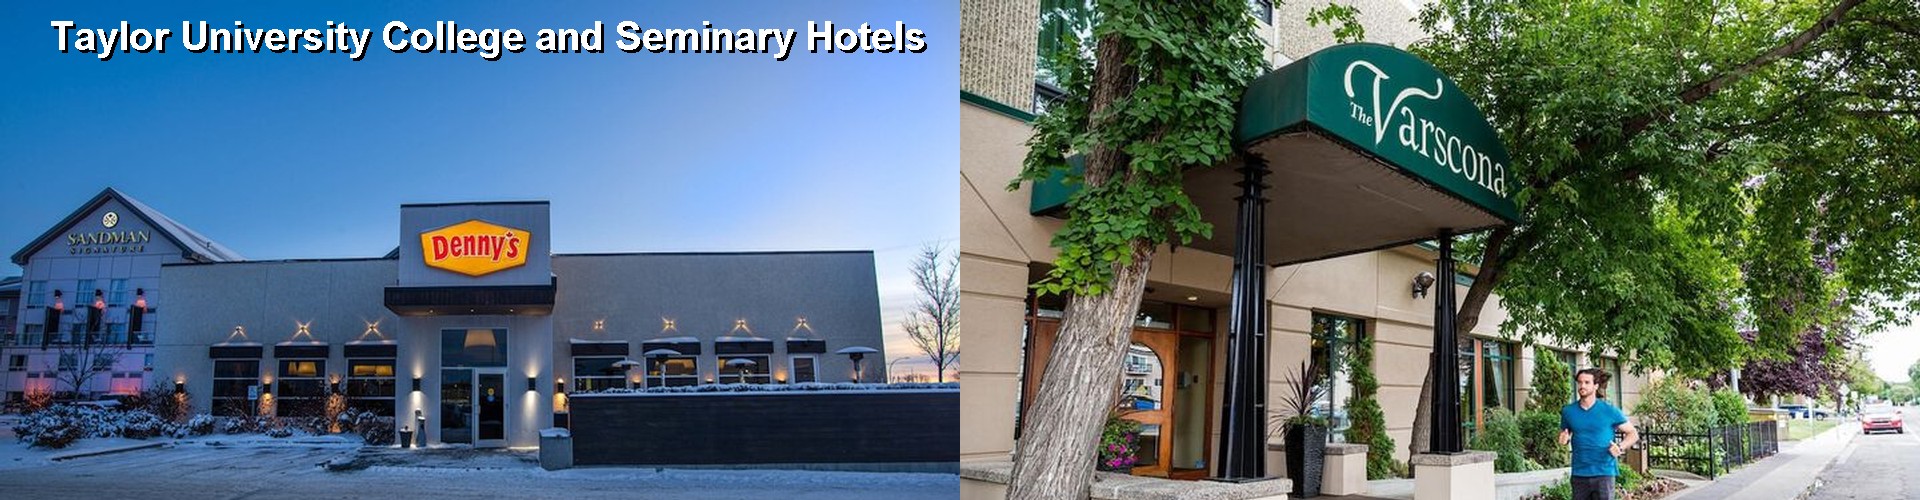 5 Best Hotels near Taylor University College and Seminary